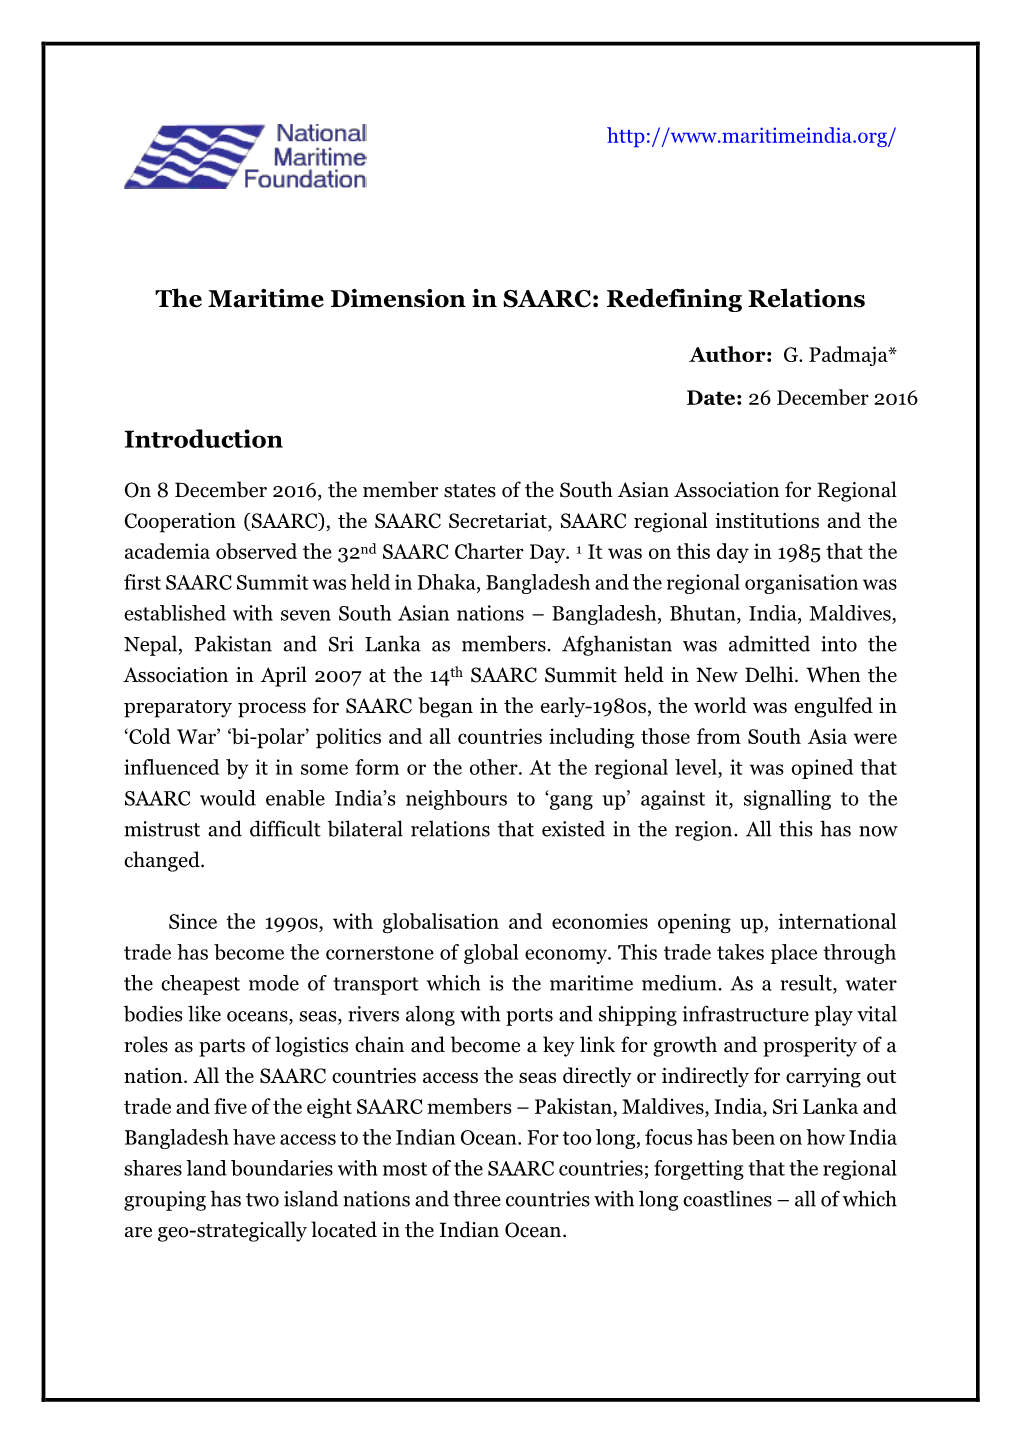 The Maritime Dimension in SAARC: Redefining Relations